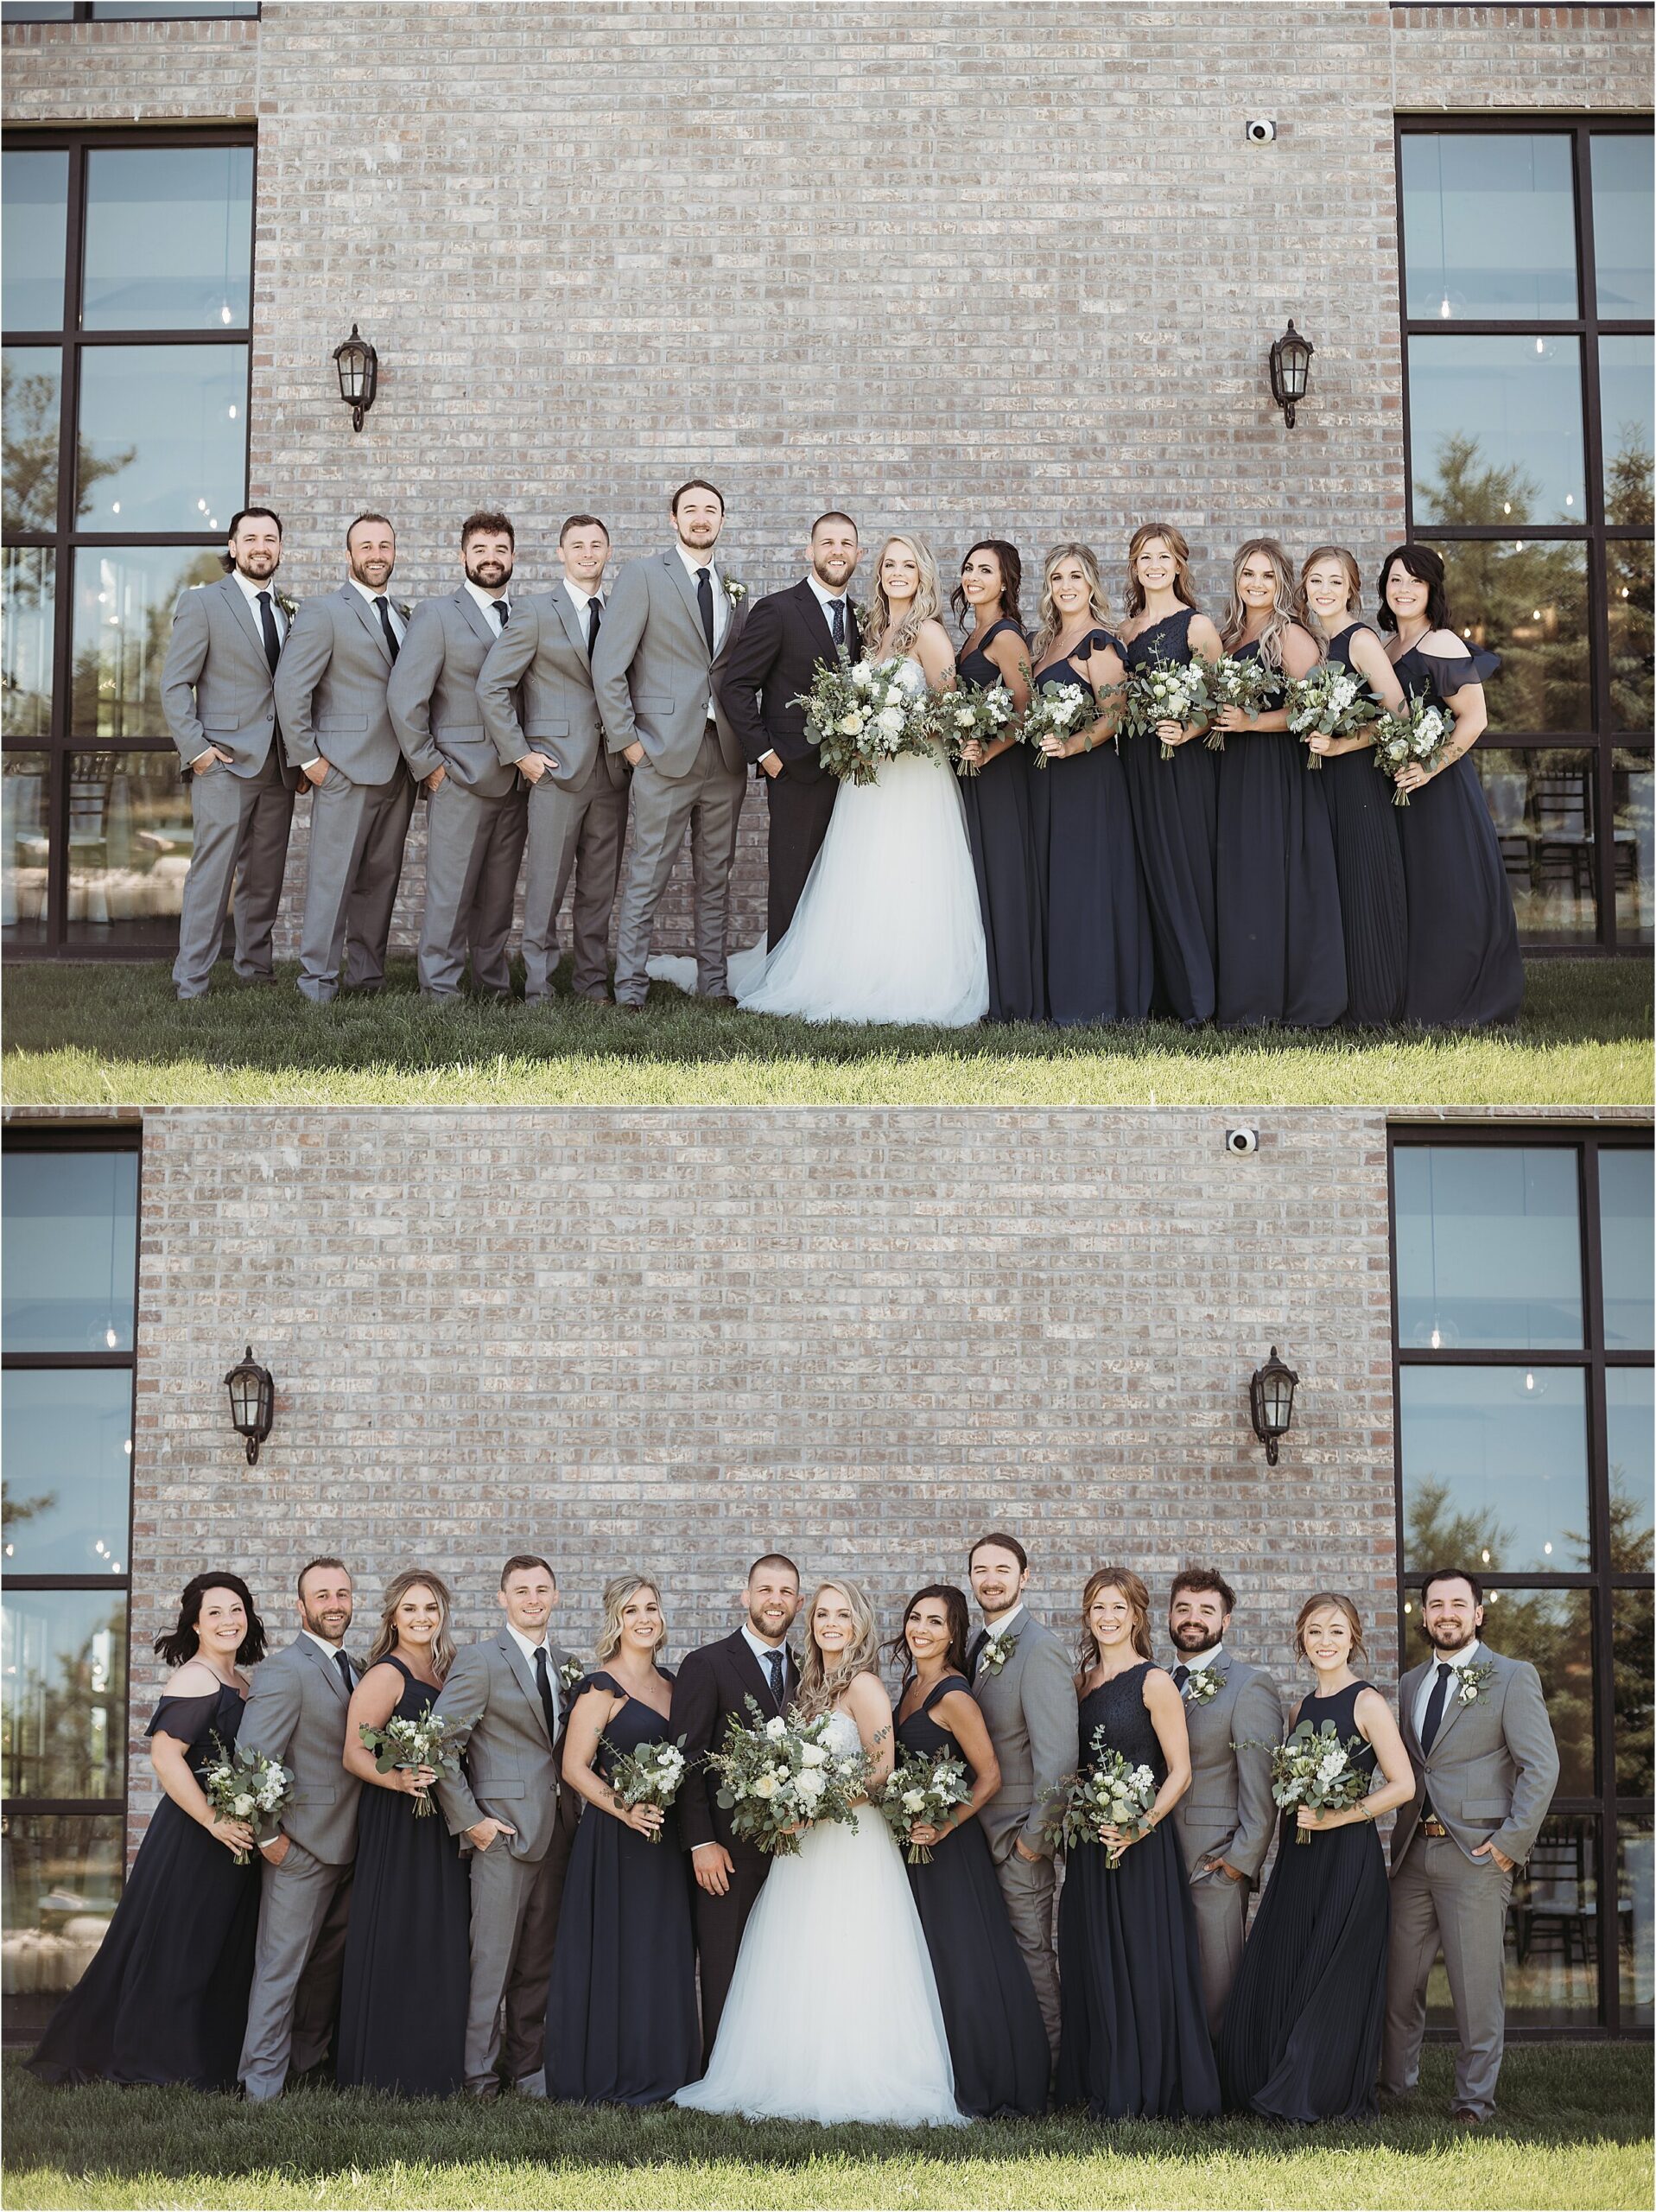 wedding party in navy blue chiffon dresses and gray suits